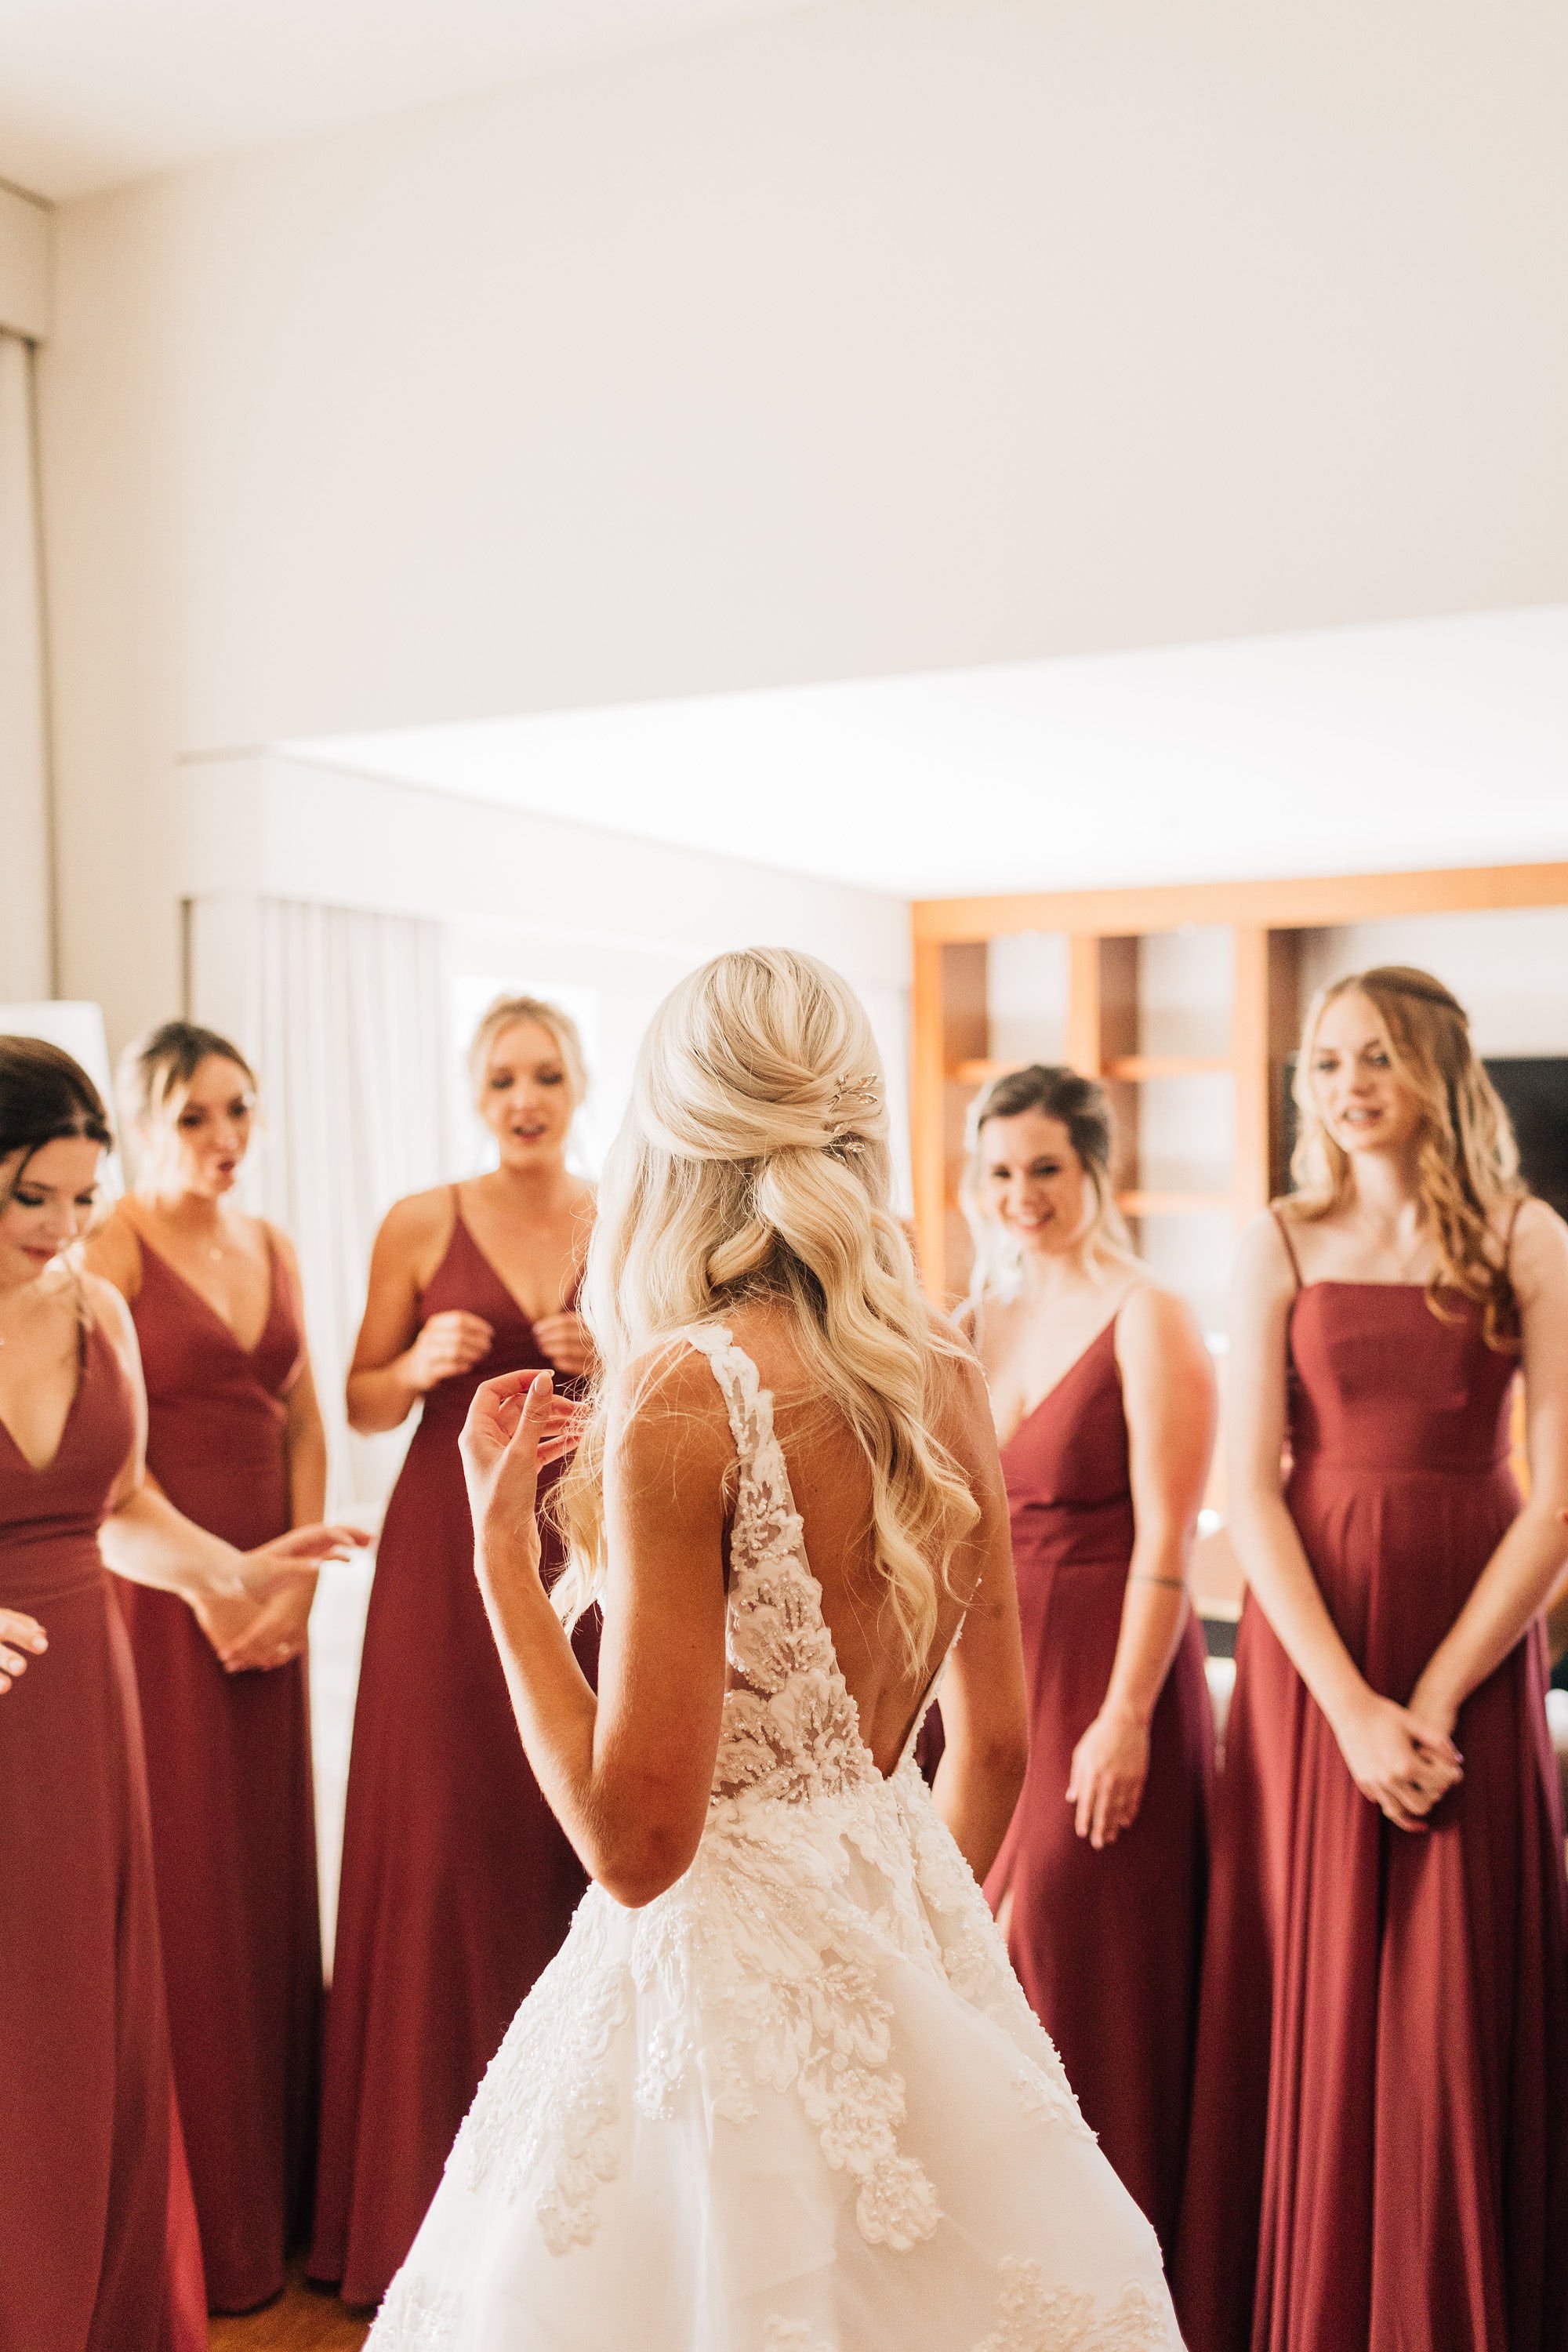 pacific-engagements-wedding-planner-seattle-bride-getting-ready-photos-by-jenna-bechtholt-photography